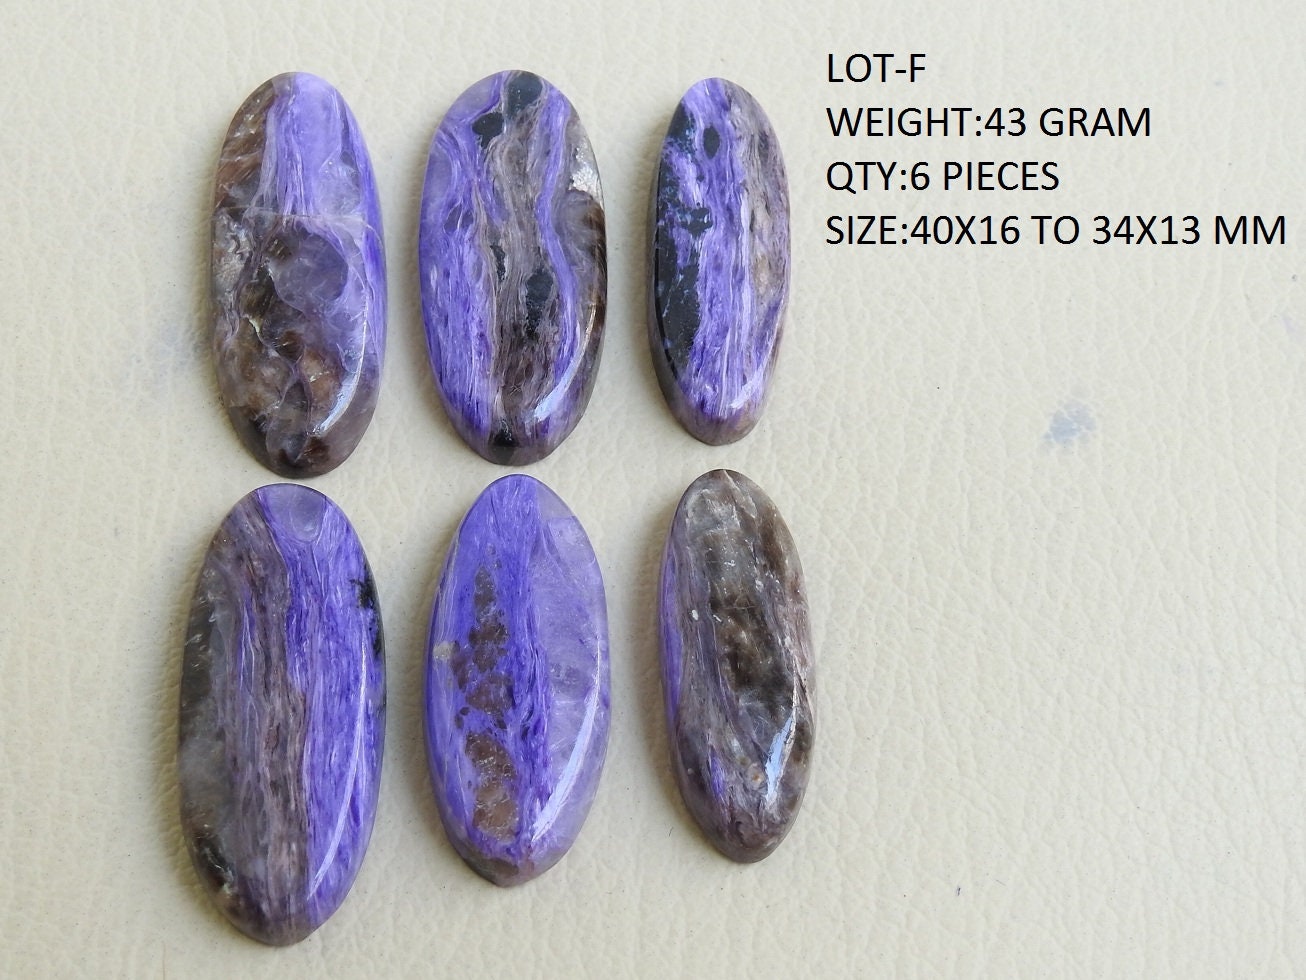 Charoite Smooth Cabochons Lot,Loose Stone,Fancy Shape,Handmade,Gemstone For Making Pendent,Jewelry Wholesale Price New Arrival C3 | Save 33% - Rajasthan Living 19